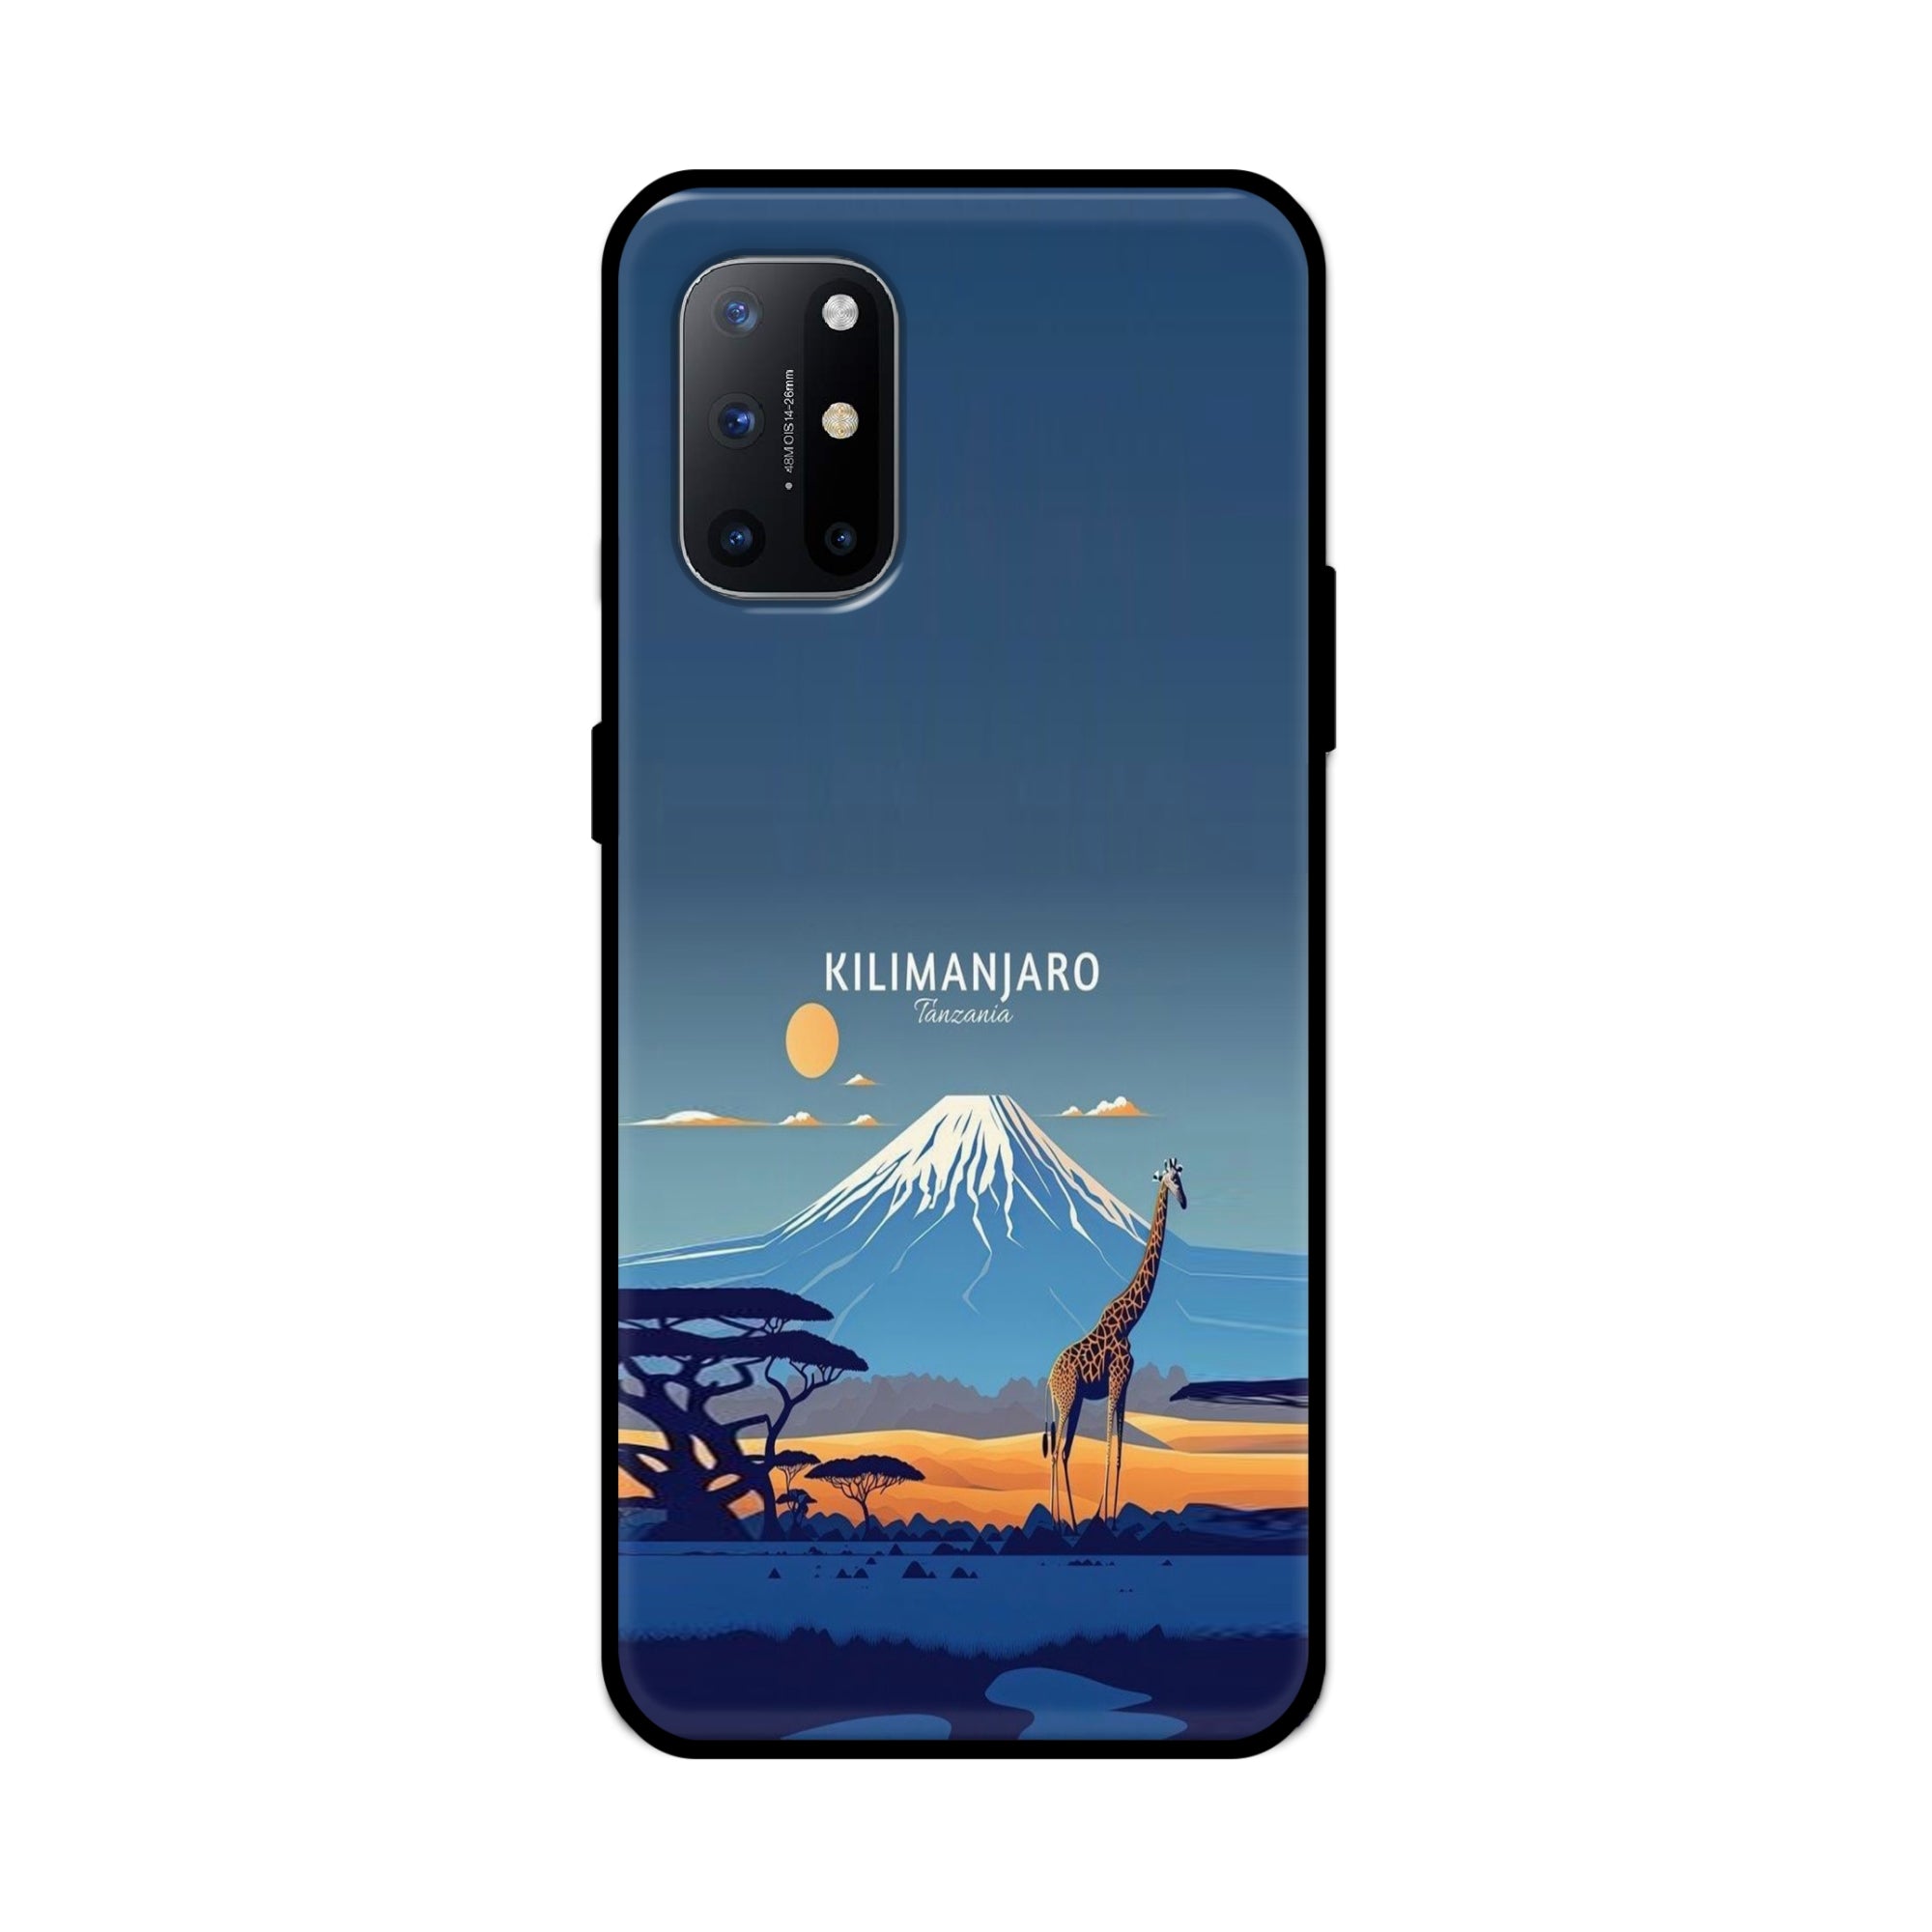 Buy Kilimanjaro Metal-Silicon Back Mobile Phone Case/Cover For Oneplus 9R / 8T Online